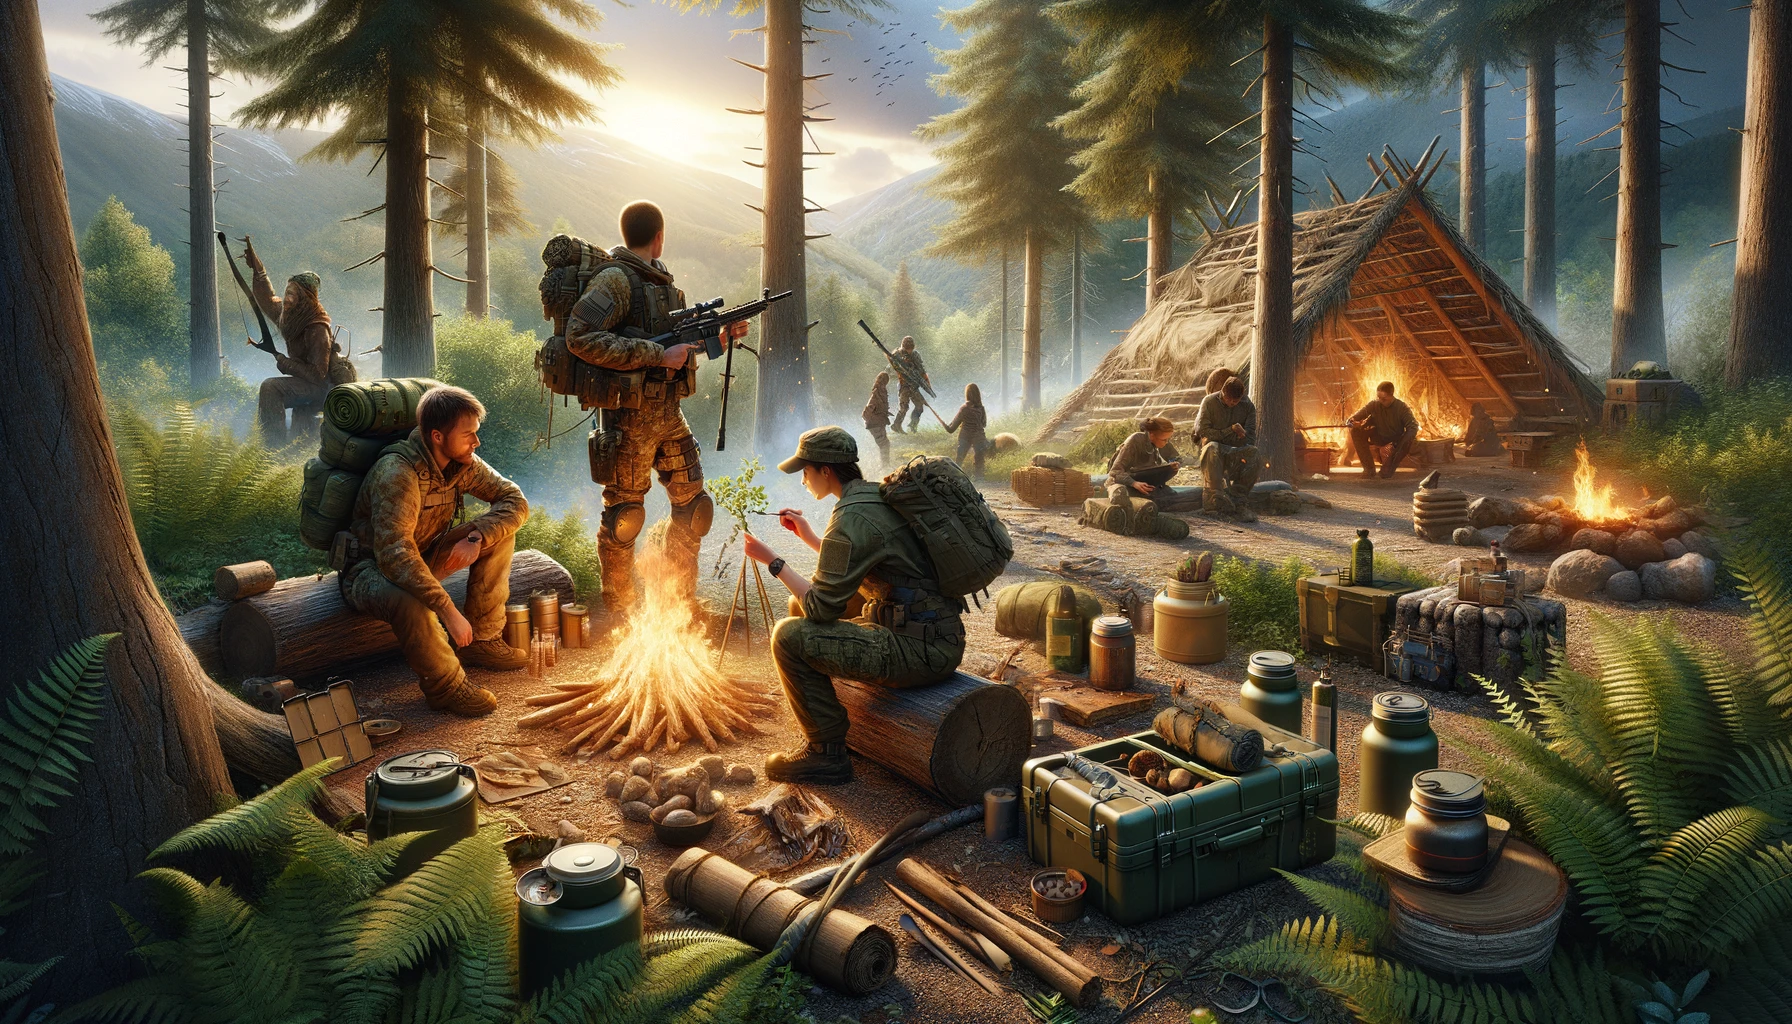 A highly realistic depiction of individuals and families practicing essential survival skills, including fire-starting, water purification, shelter building, and foraging, in a detailed and vibrant setting that emphasizes readiness and adaptability for survival and self-reliance